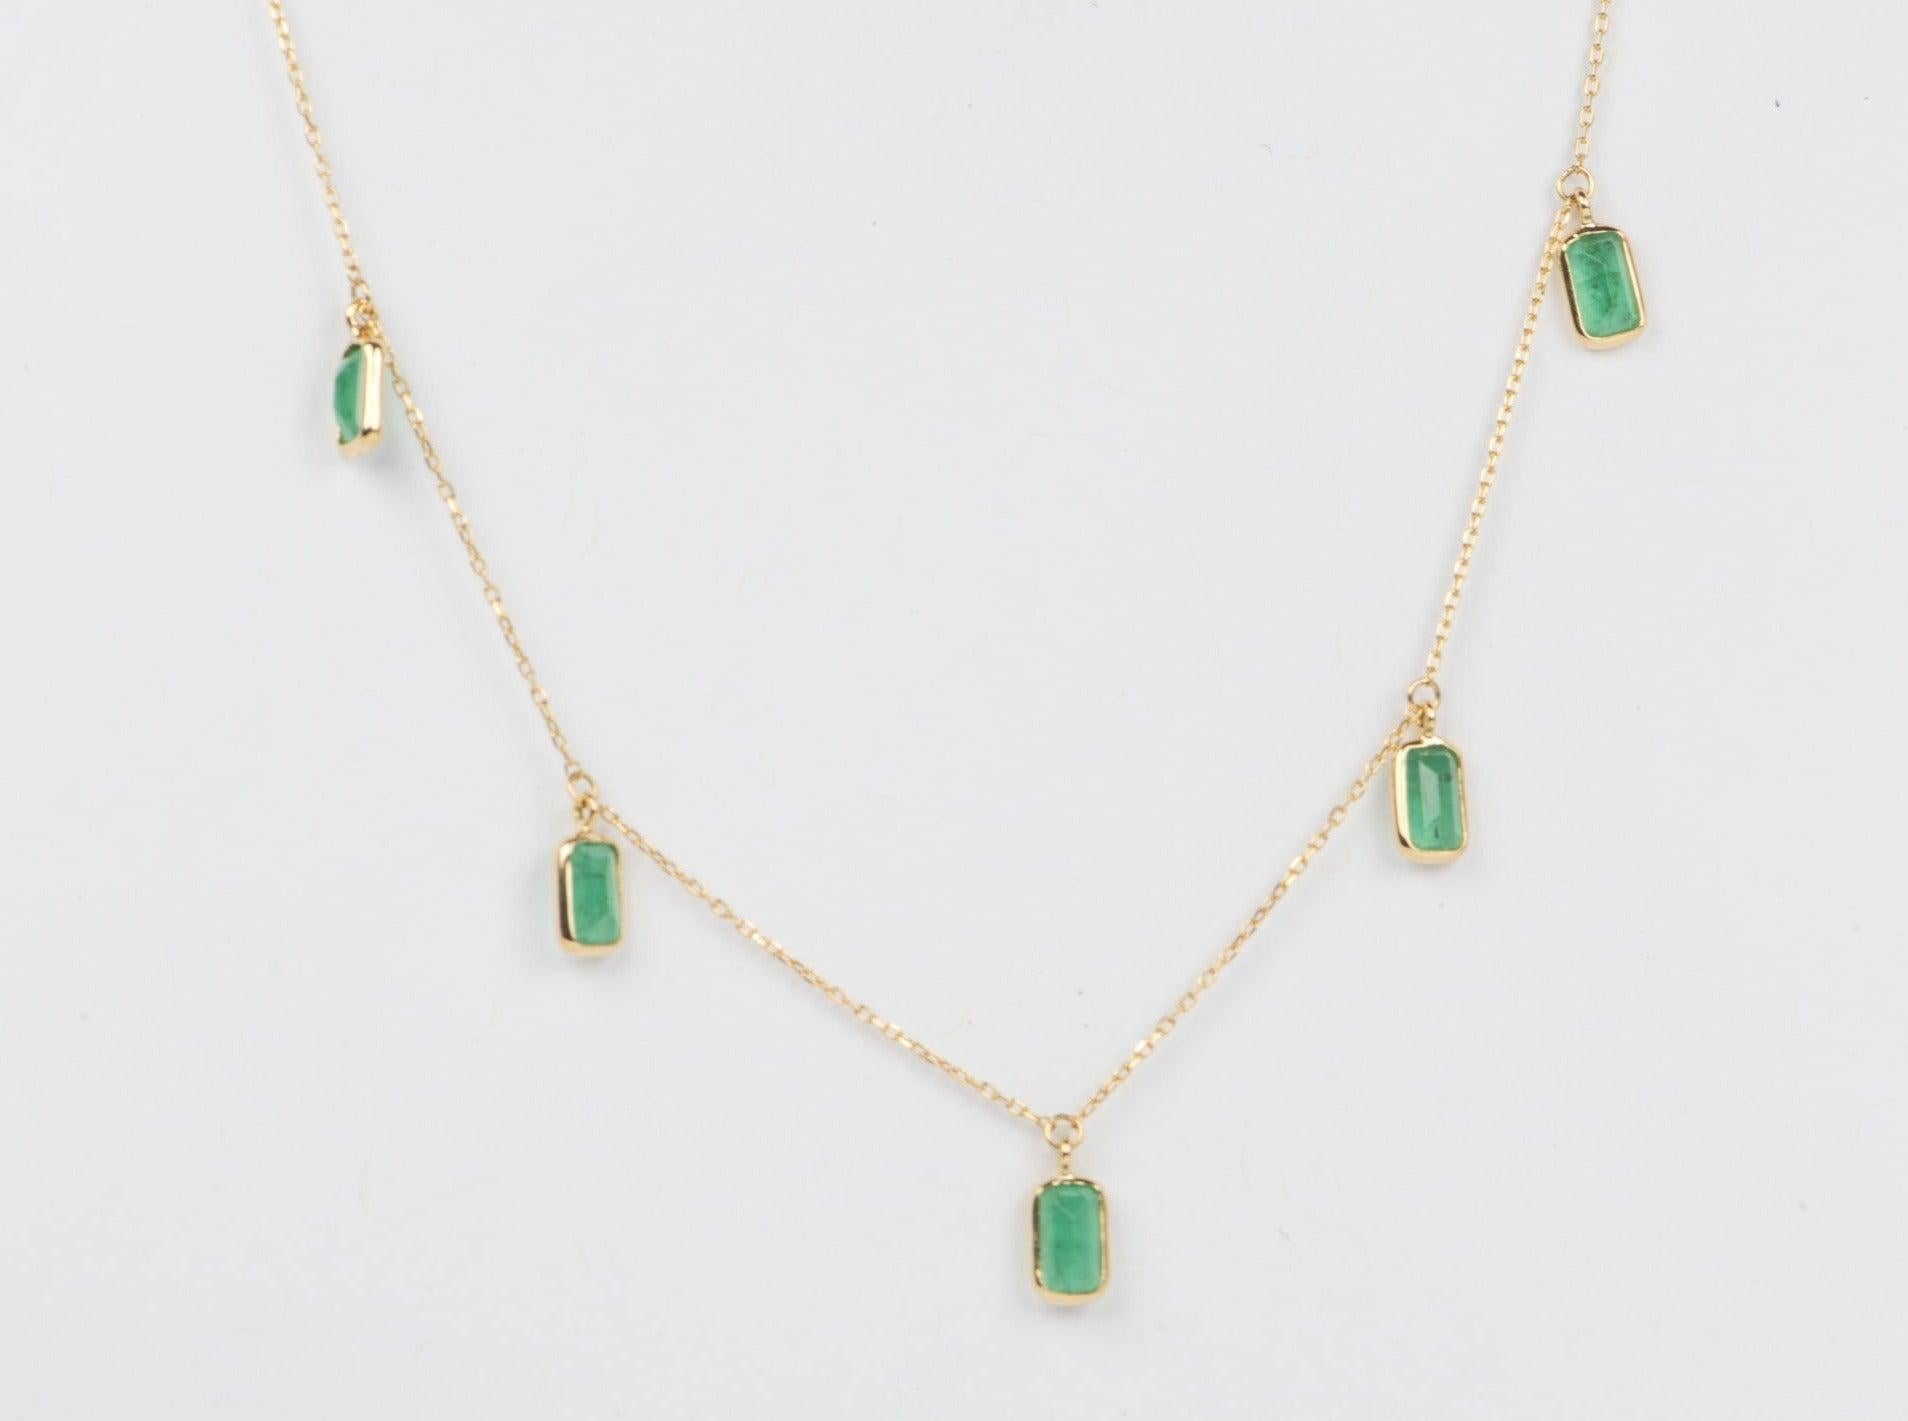 ♥ This beautiful necklace features 5 vibrant green emeralds encased in buttery 18K gold bezel setting
♥ This is a dainty chain that can be worn alone or layered with other necklaces.
♥ The necklace measures 16